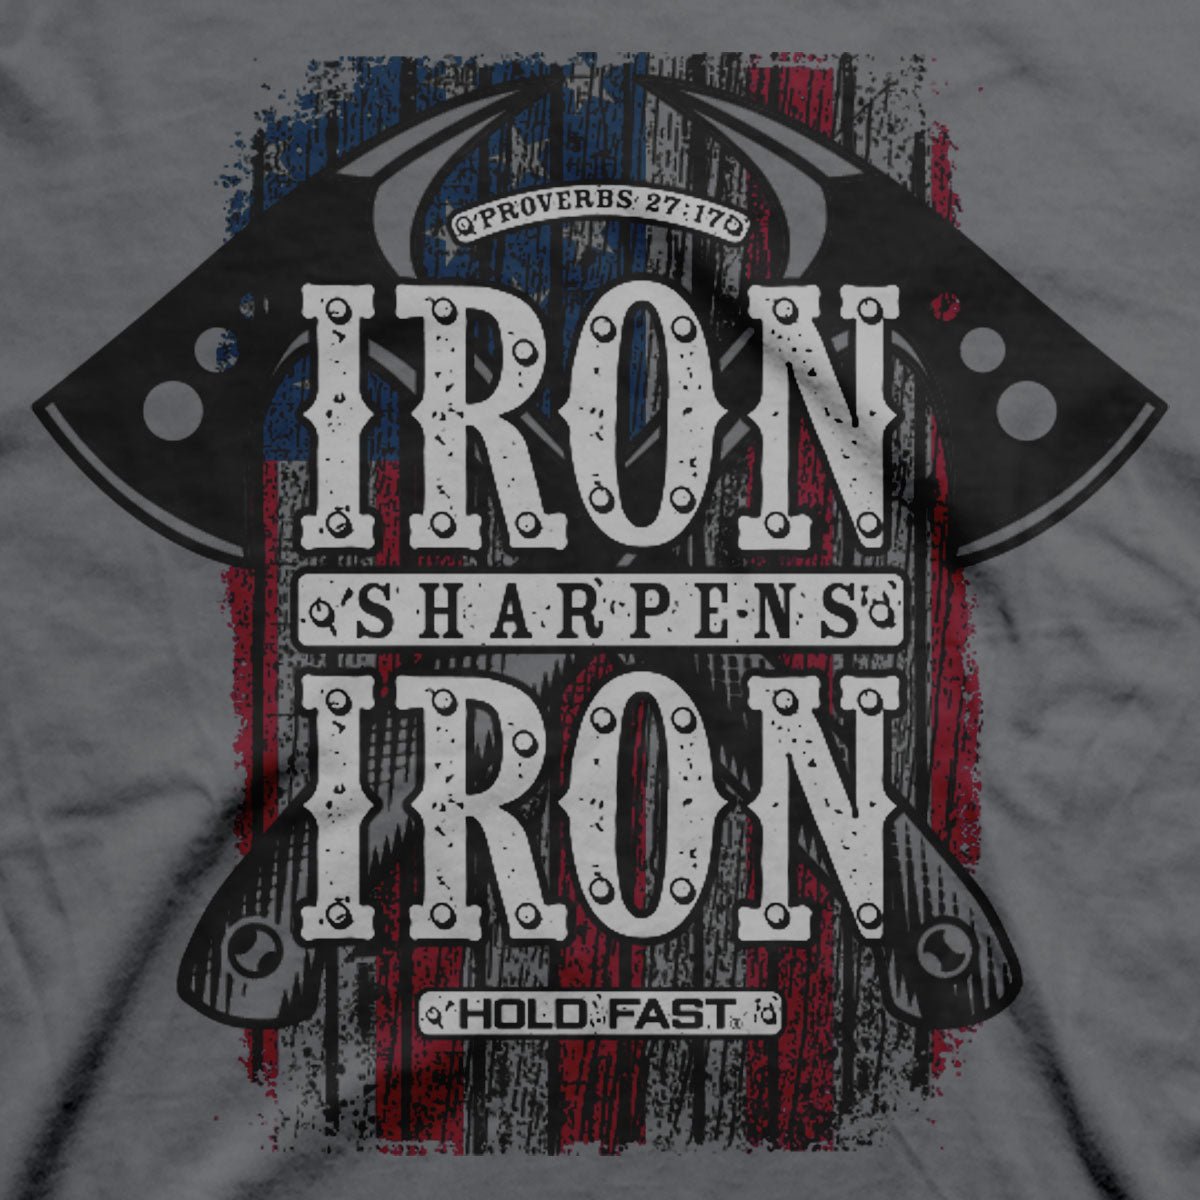 HOLD FAST Mens T-Shirt Iron Axes | 2FruitBearers